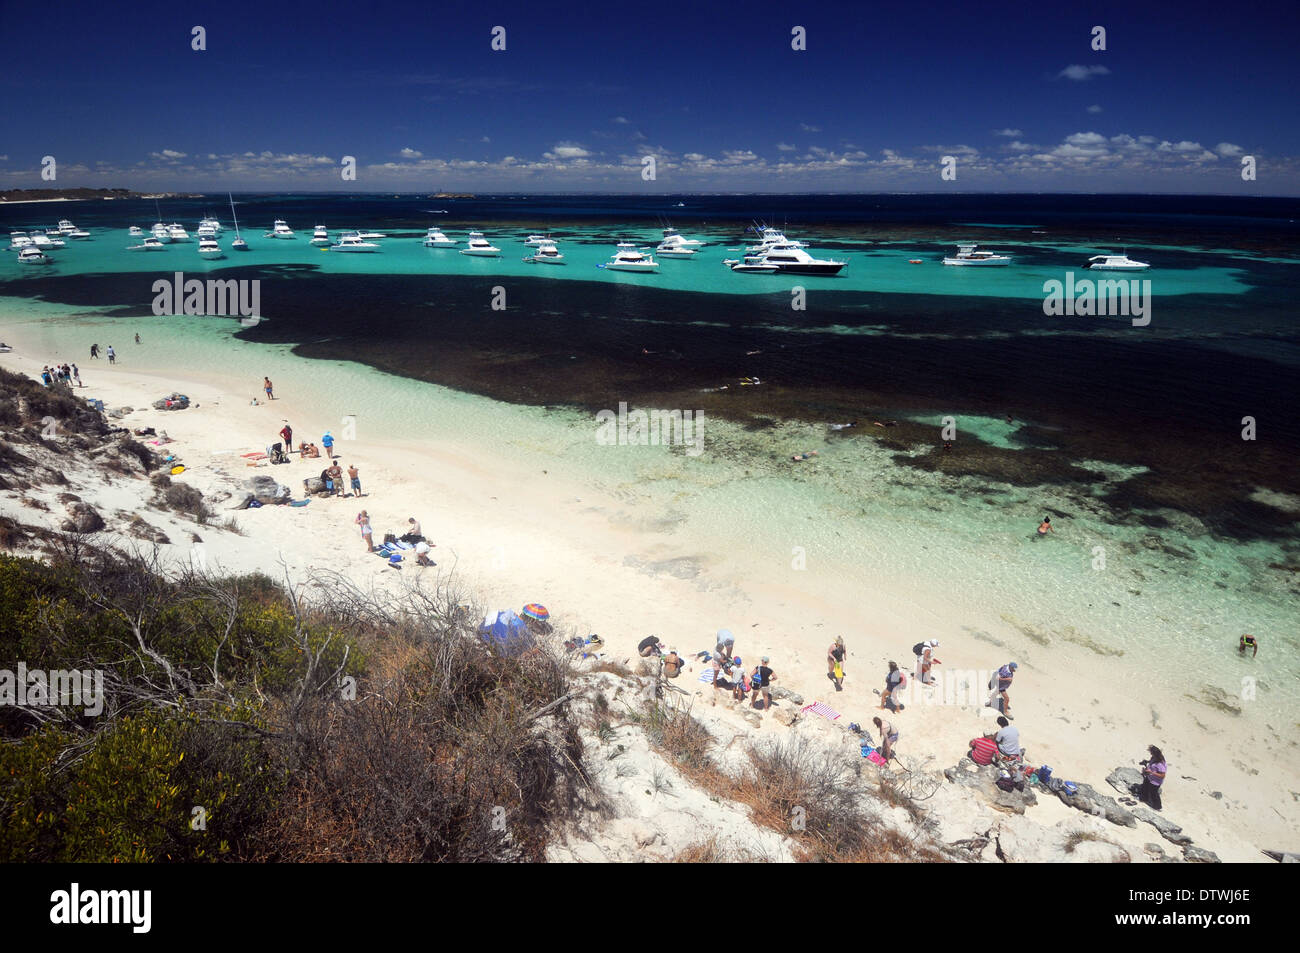 People on beach and boats moored at Parker Point, Rottnest Island, Western Australia. No PR or MR Stock Photo